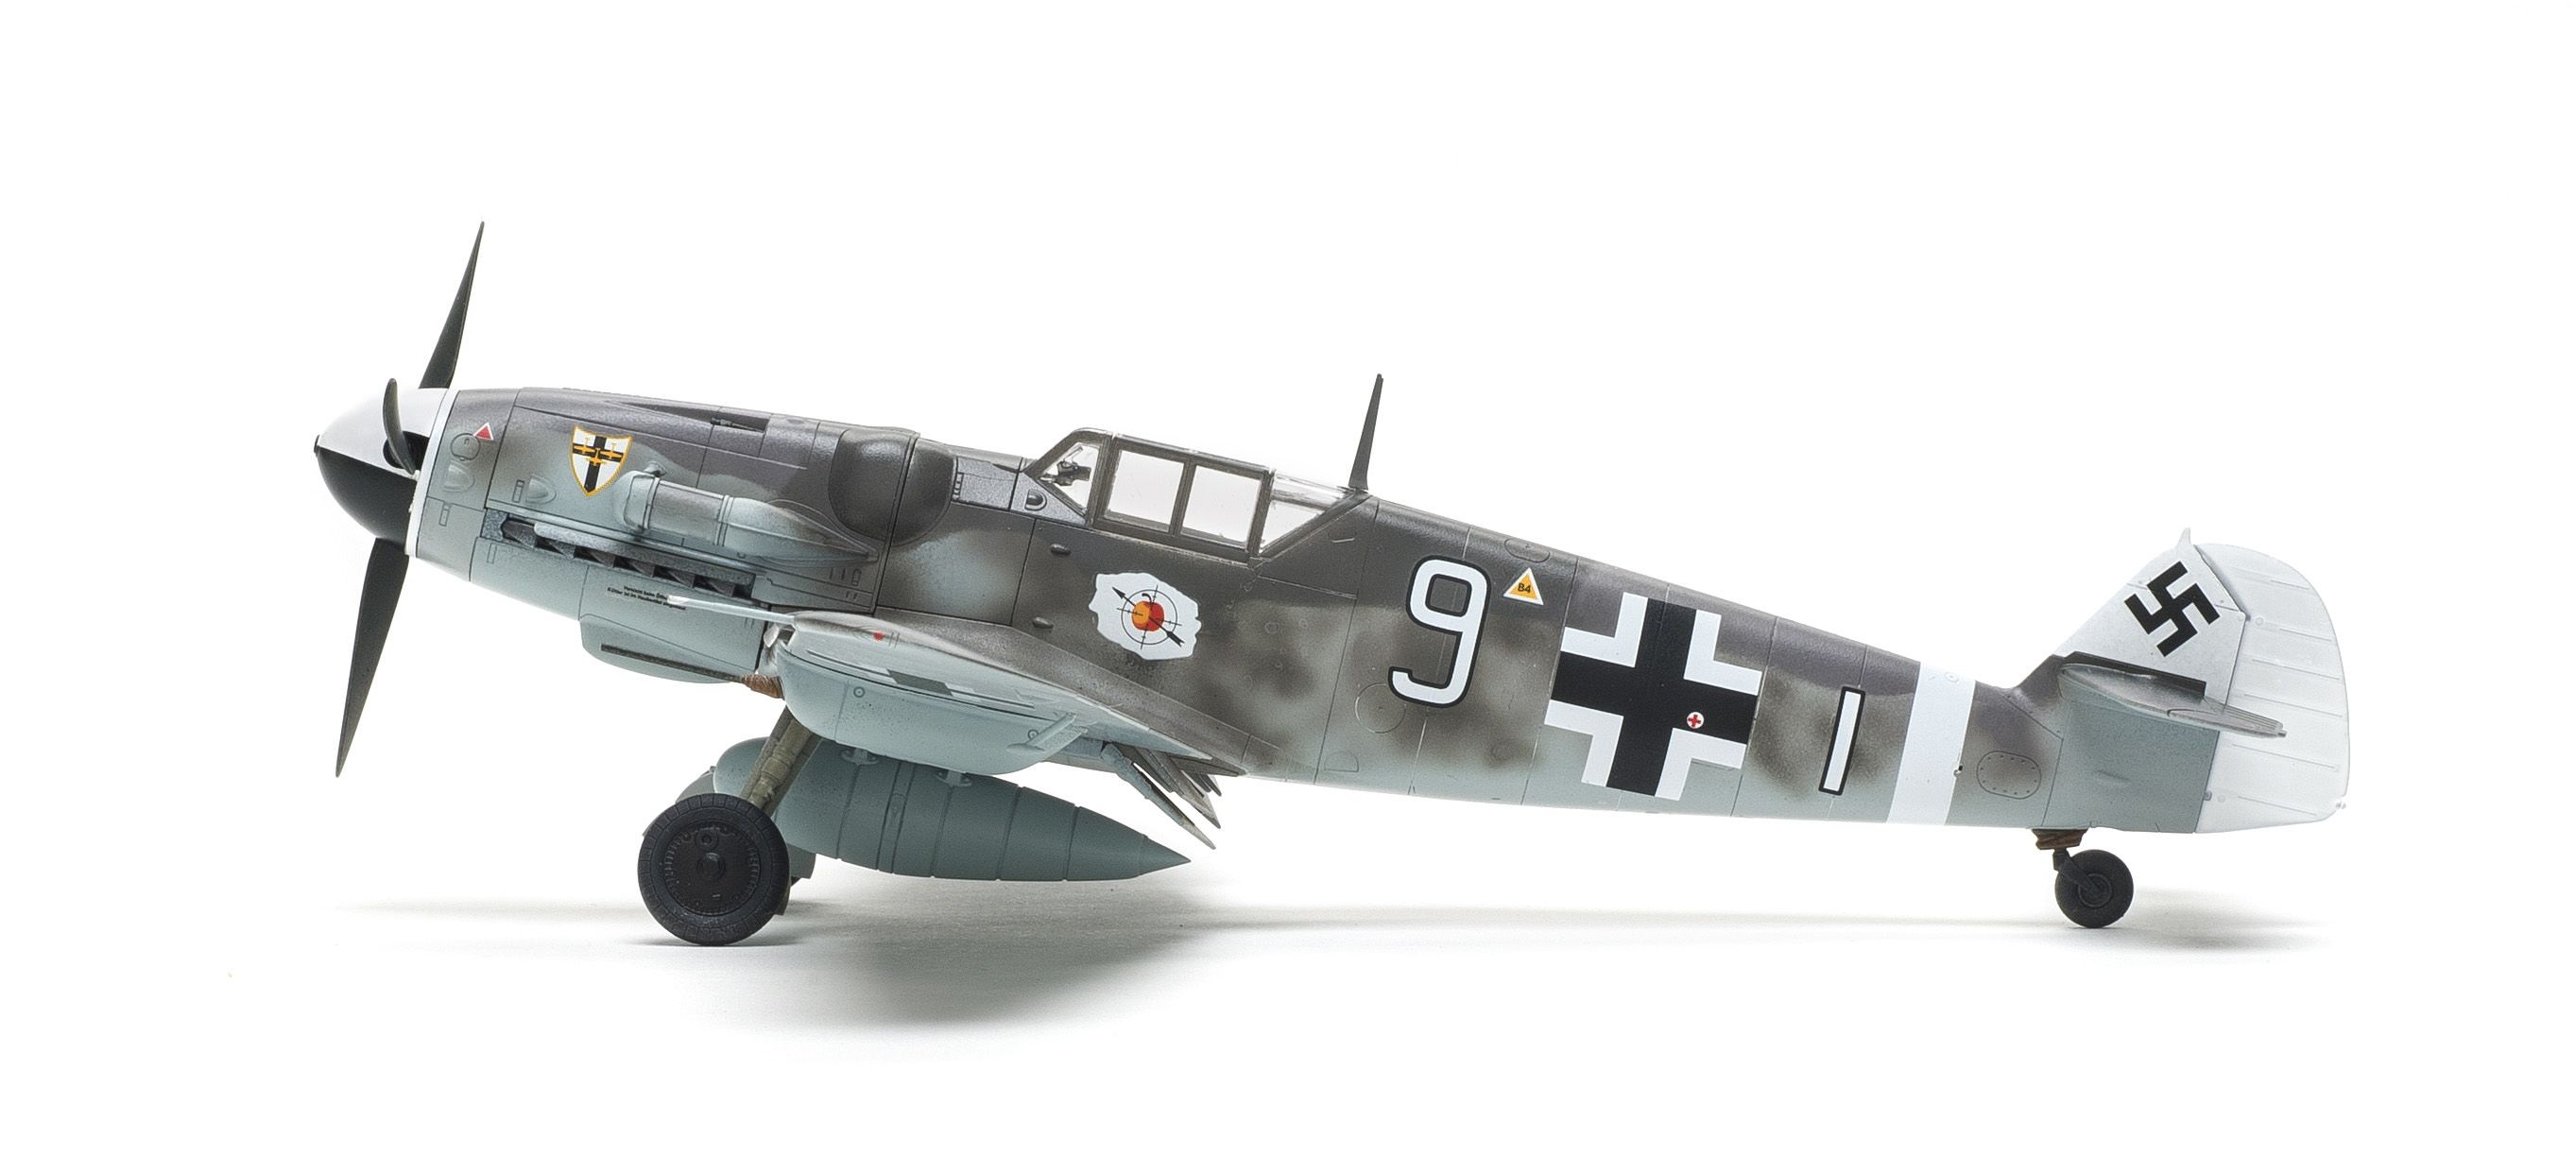 Build Review Of Tamiya Bf 109G 6 Scale Model Kit. FineScale Modeler Magazine